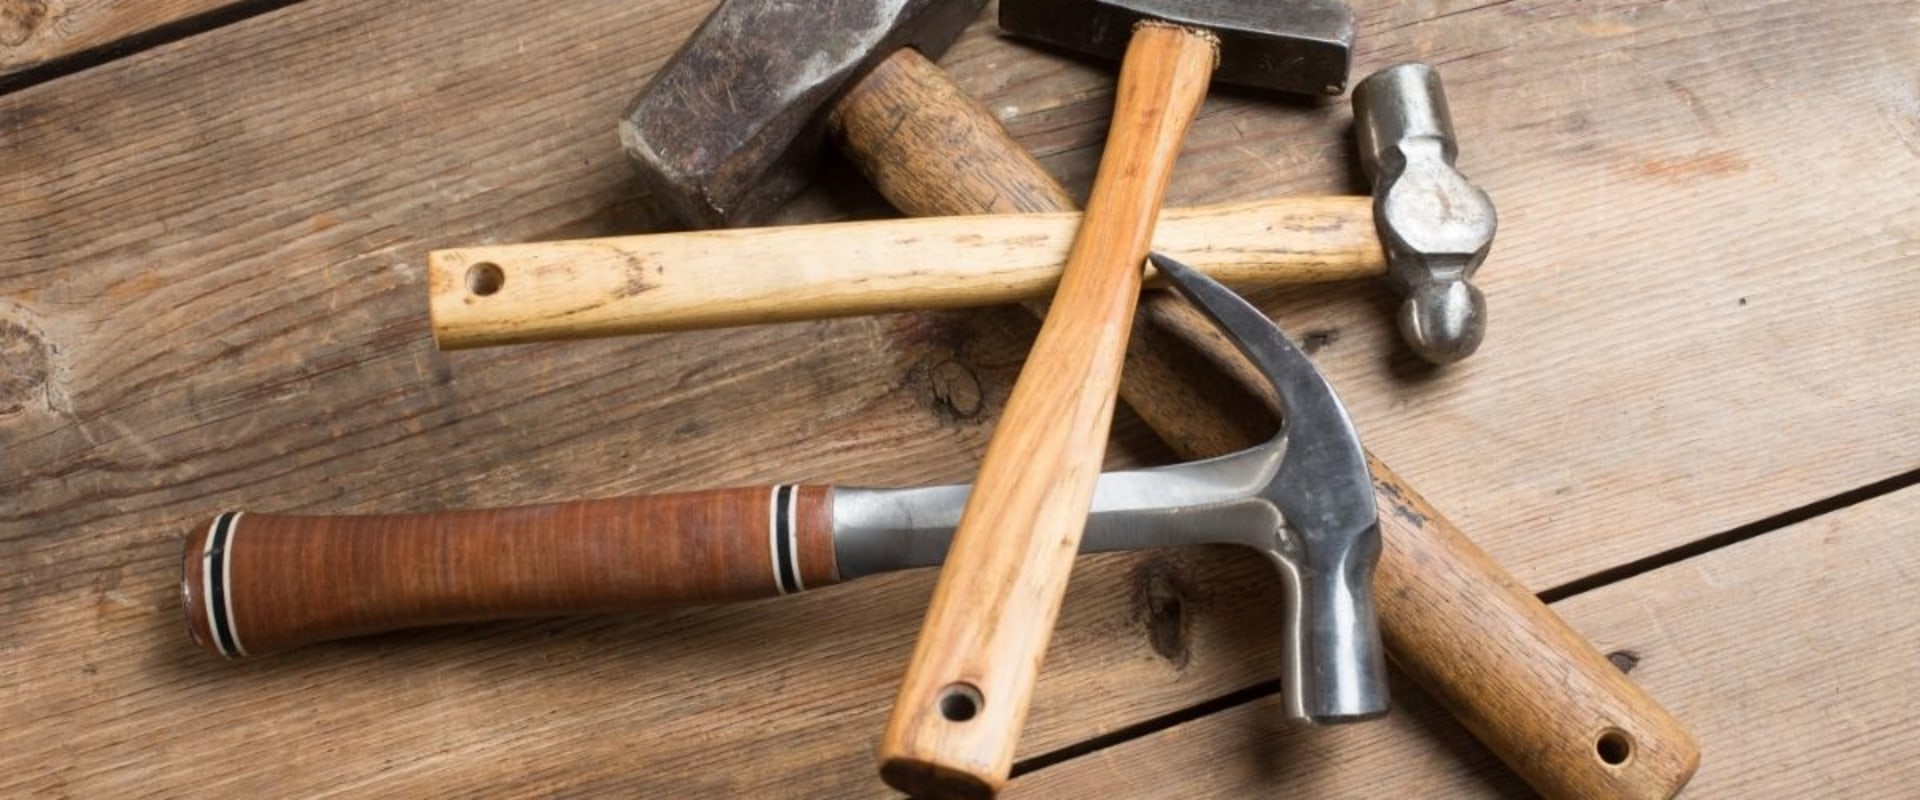 What kind of tools do carpenters need?